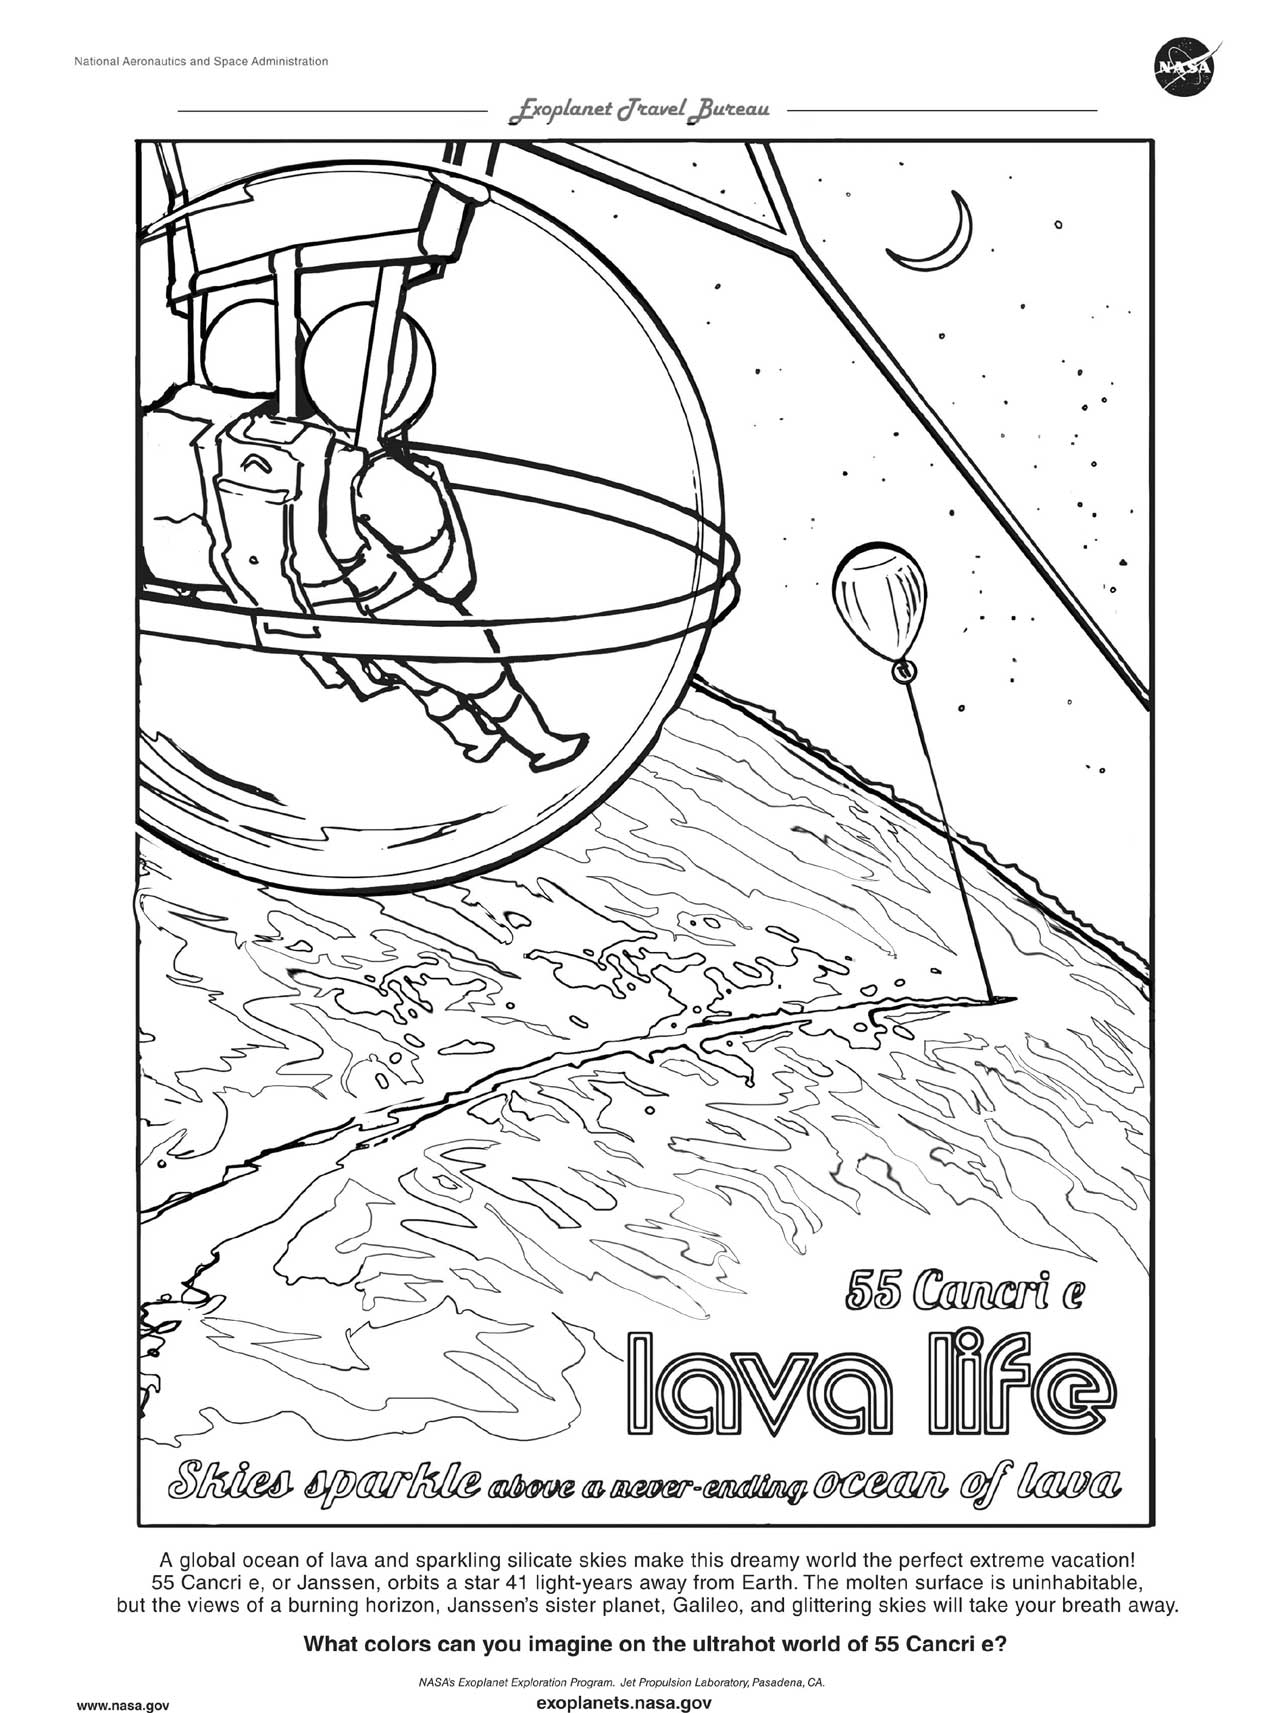 A coloring page for the exoplanet 55 Cancri e shows future visitors to the lava world in a bubble floating over an ocean of lava.